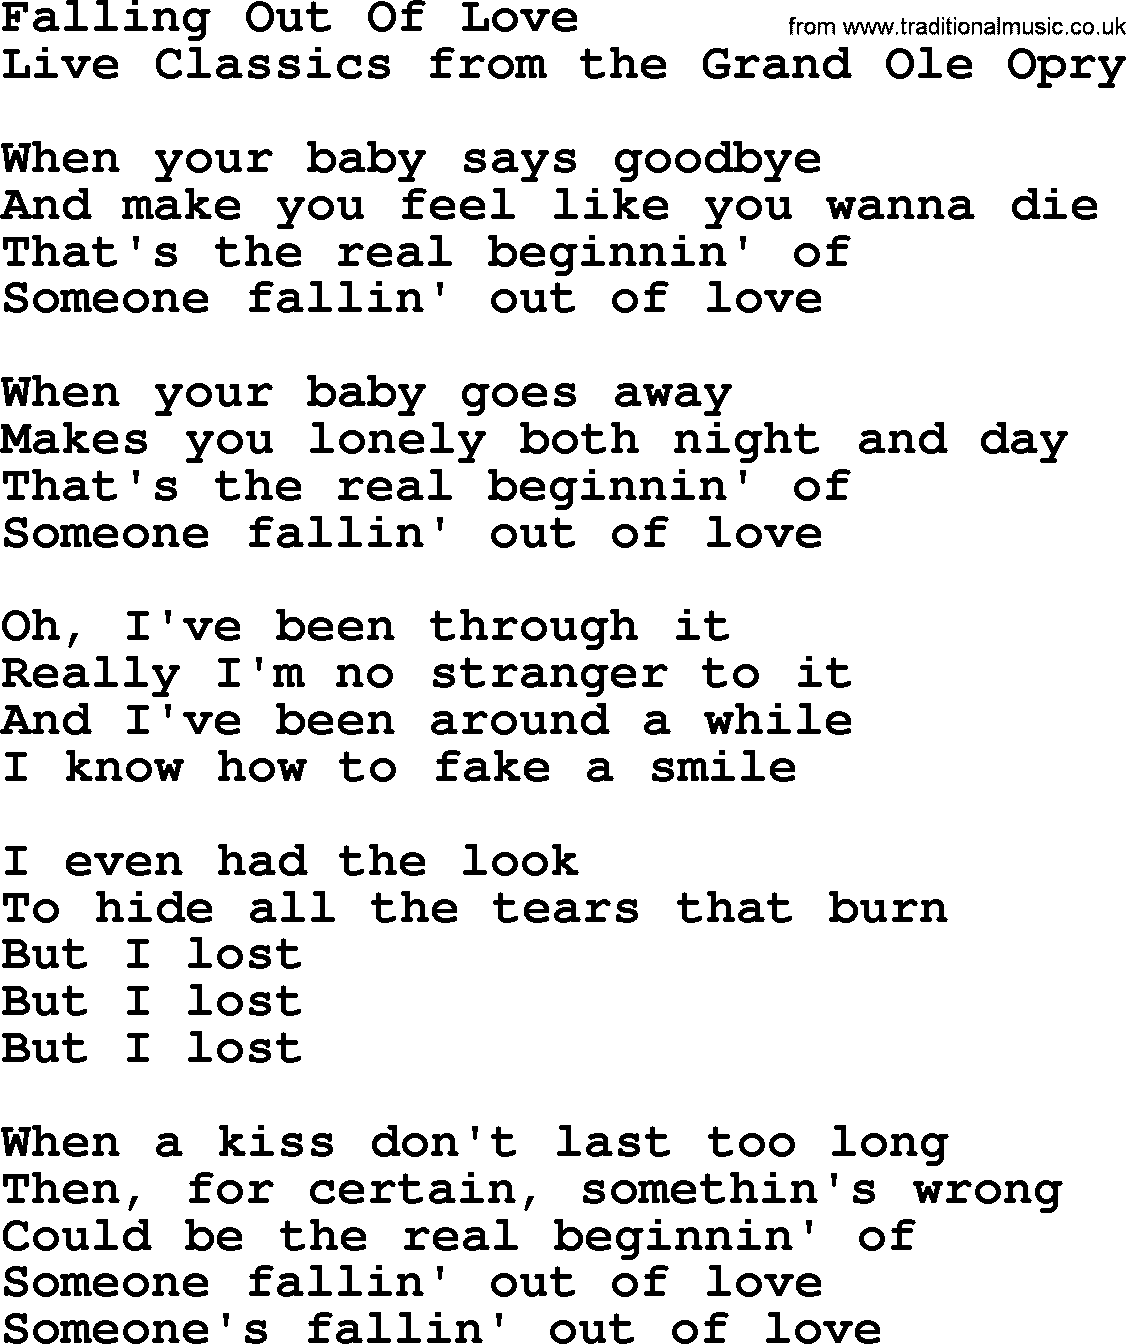 Marty Robbins song: Falling Out Of Love, lyrics